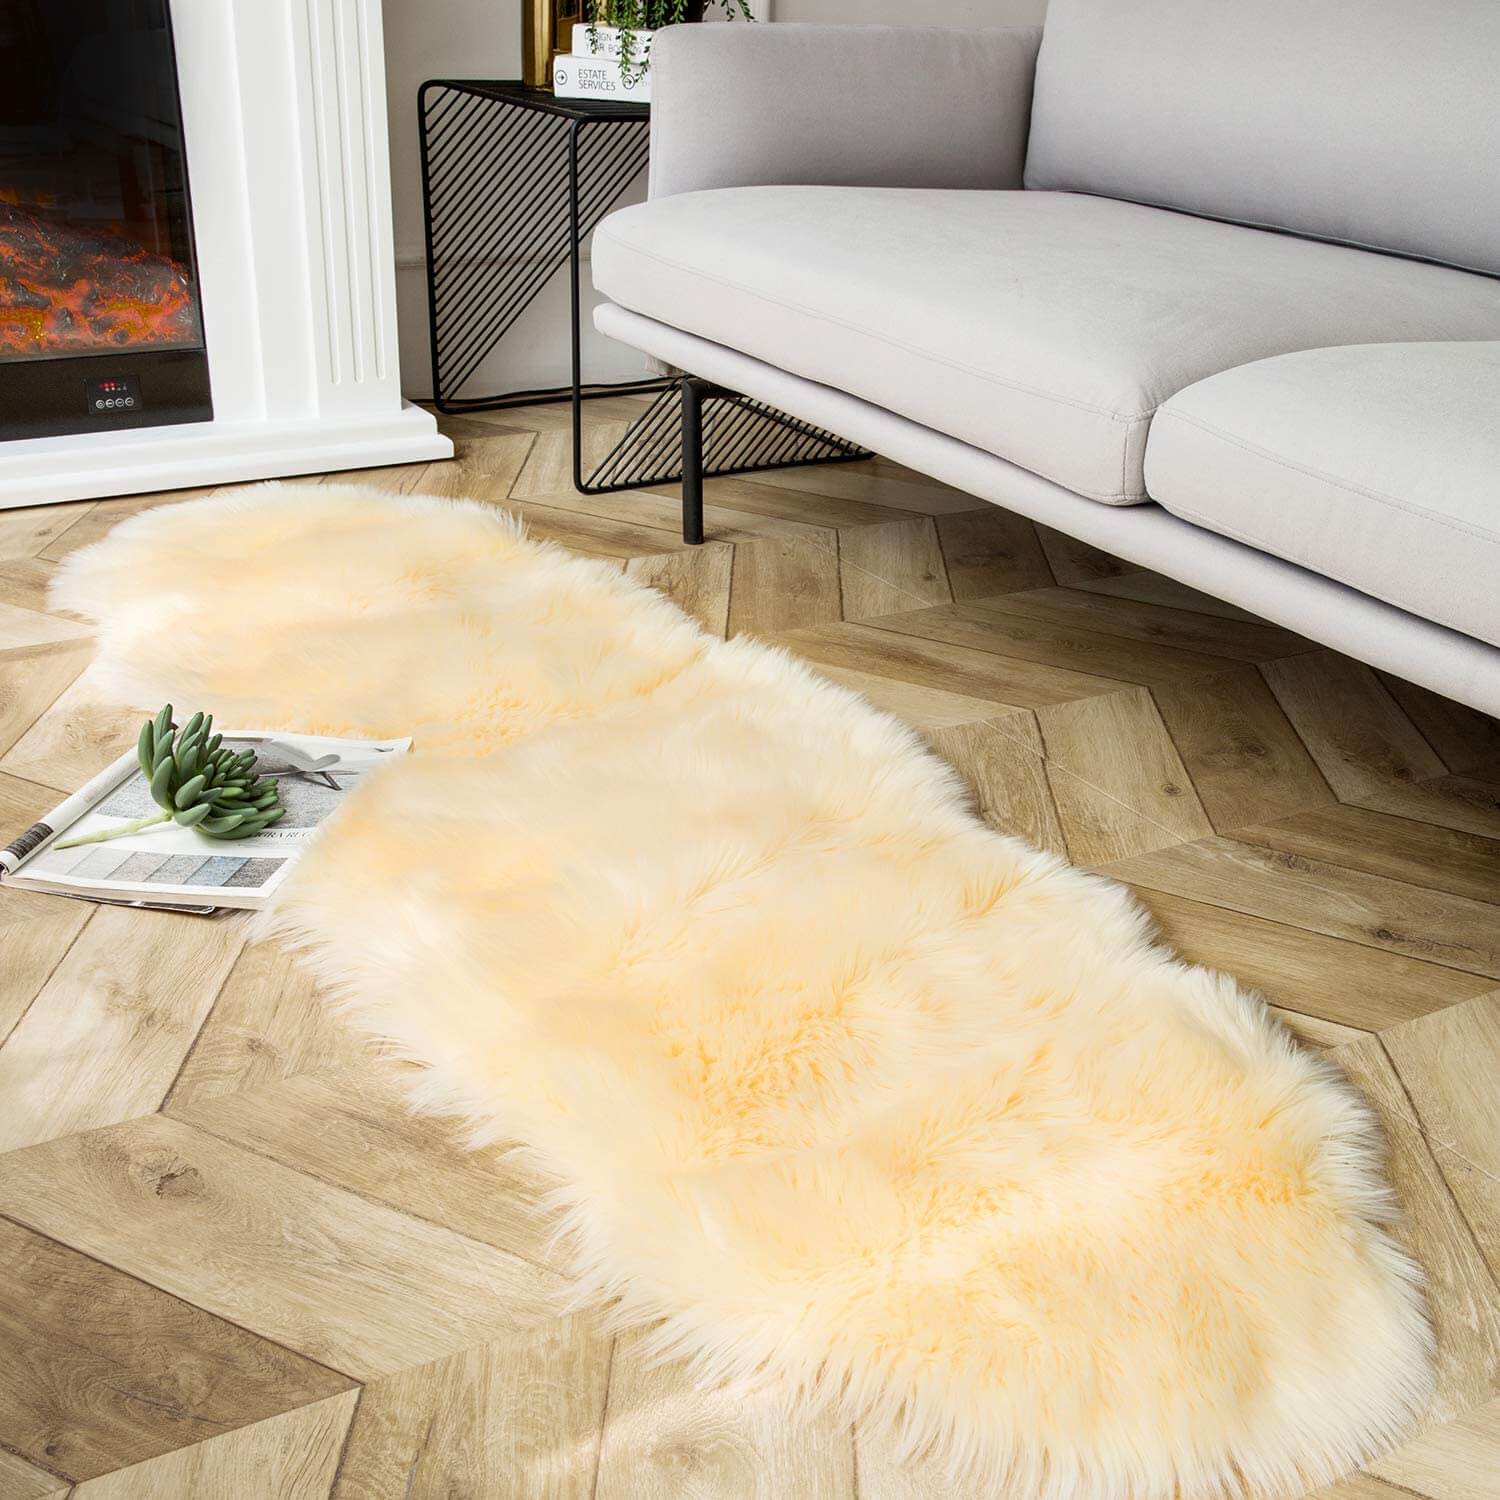 Faux Sheepskin Fur Chair Couch Cover, White Area Rug